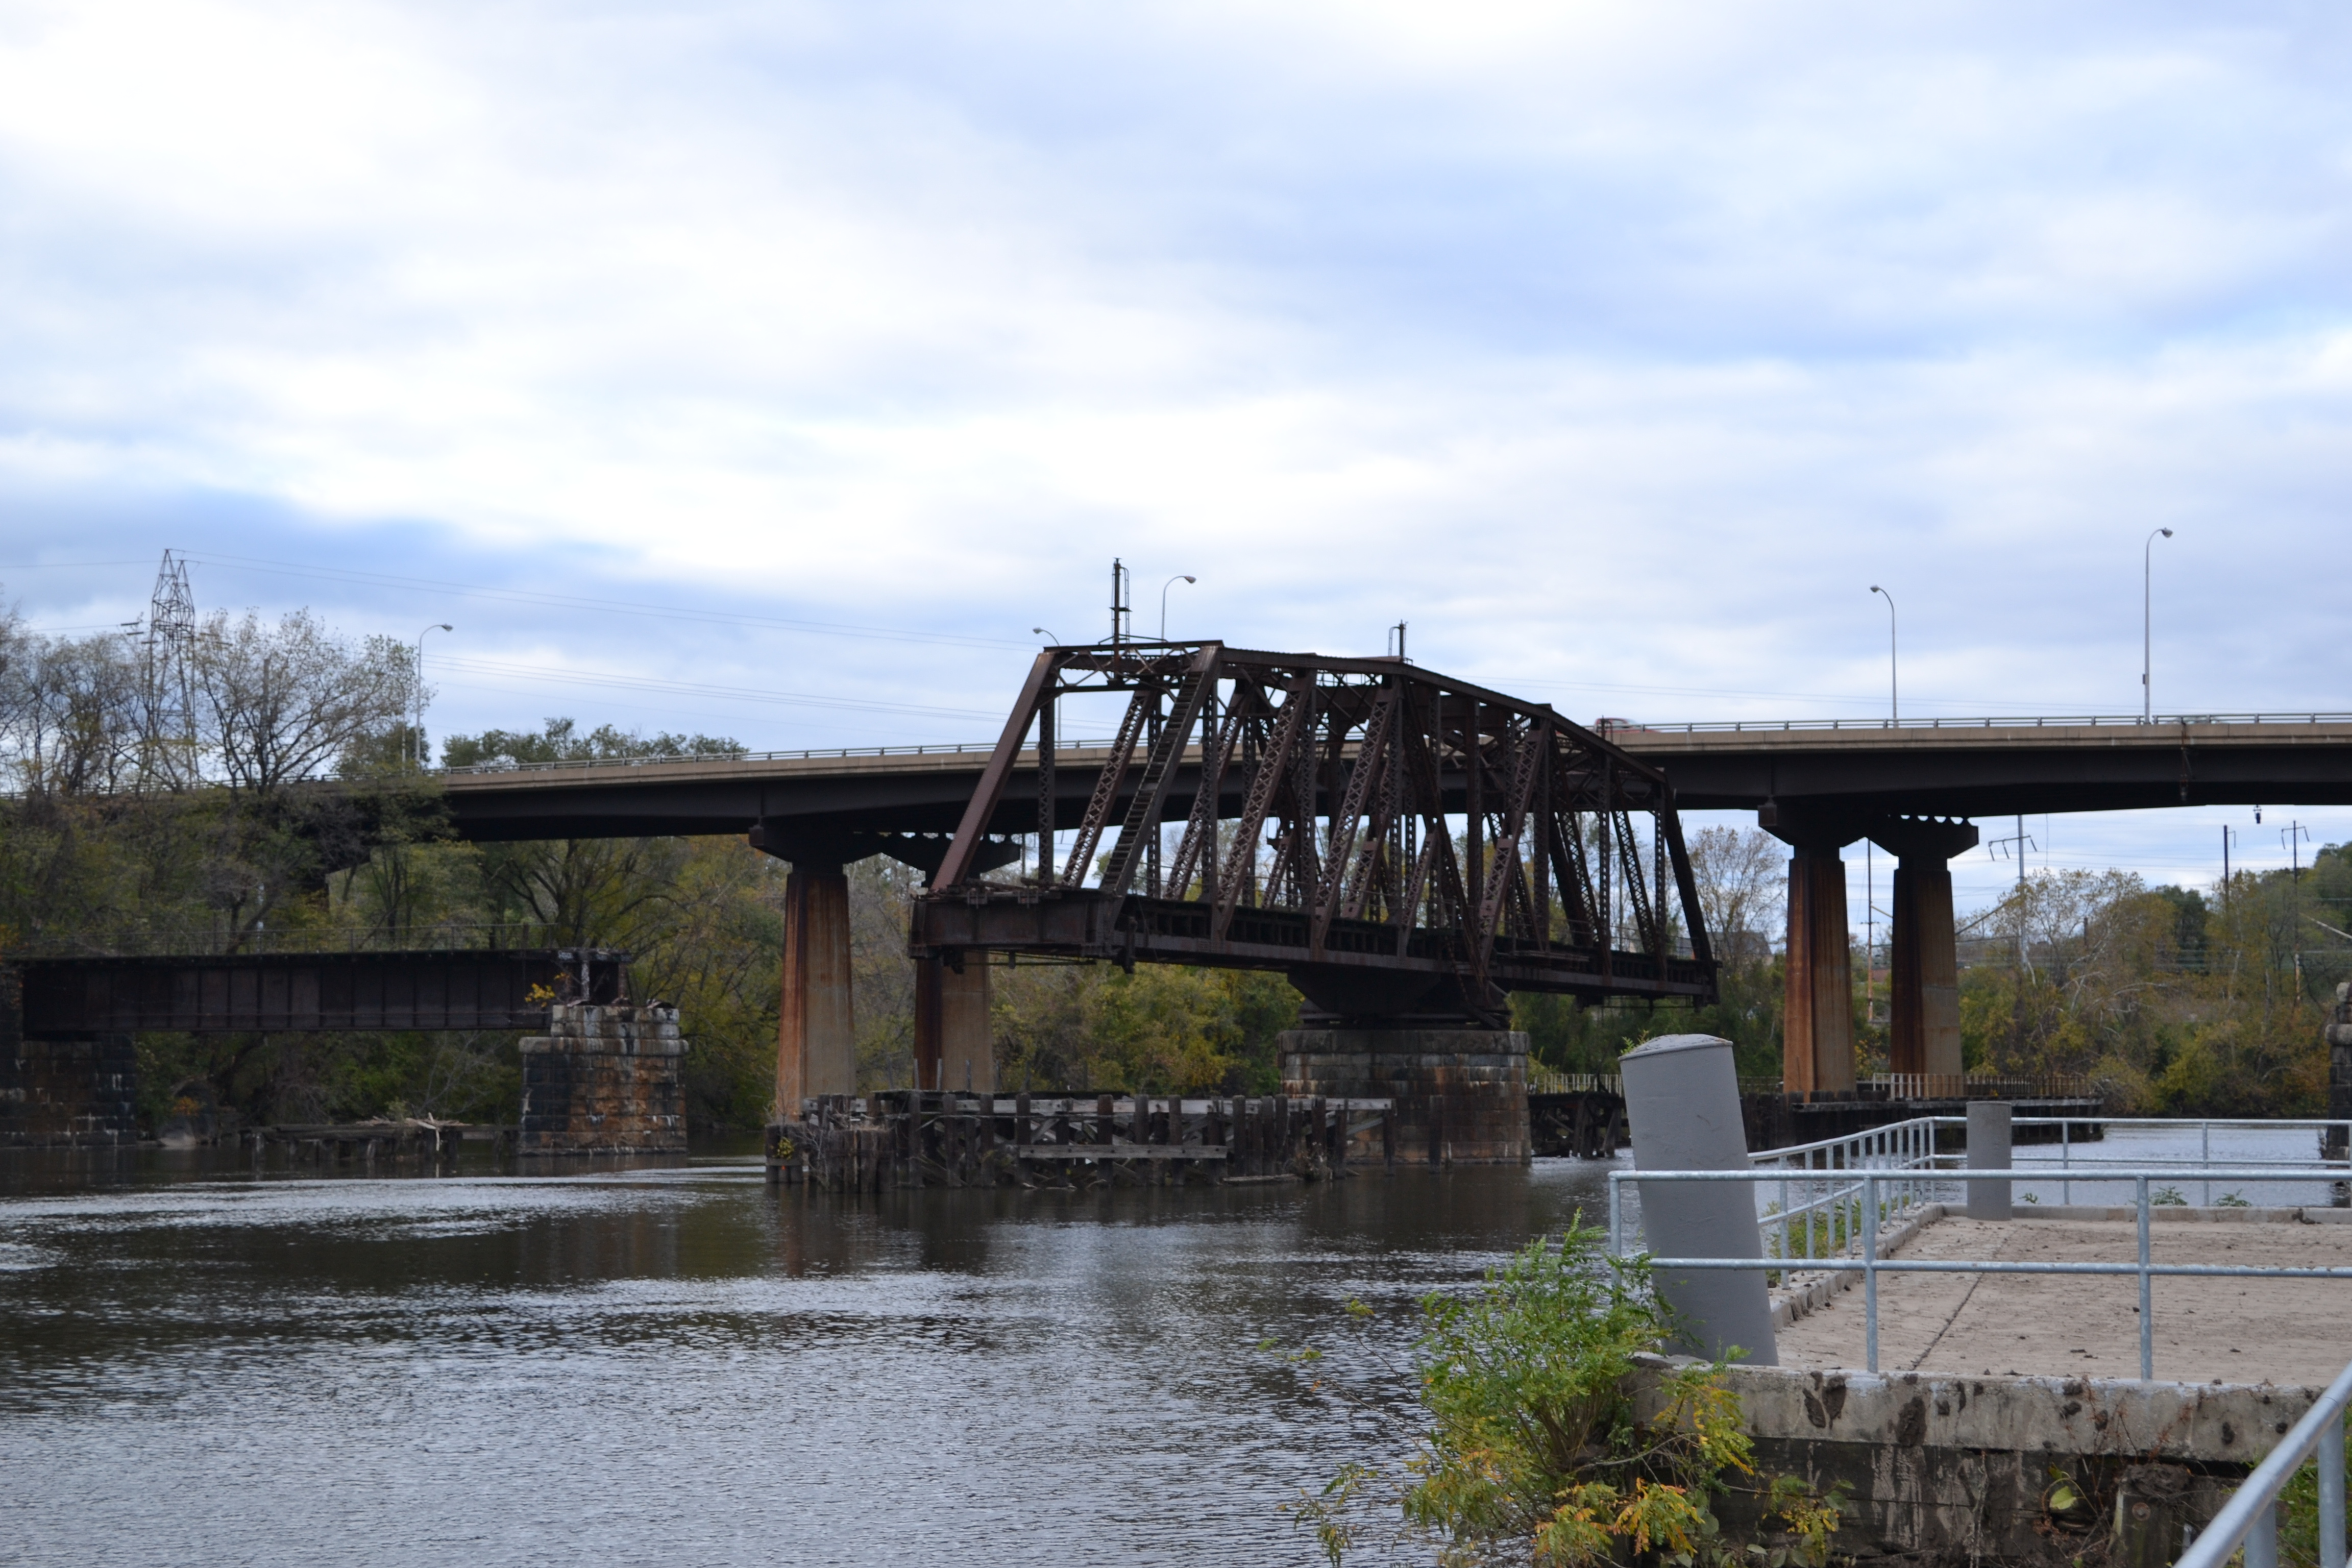 The PW&B bridge is abandoned and open, but some hope it could be rehabbed into a pedestrian and bicycle bridge to Bartram's Mile